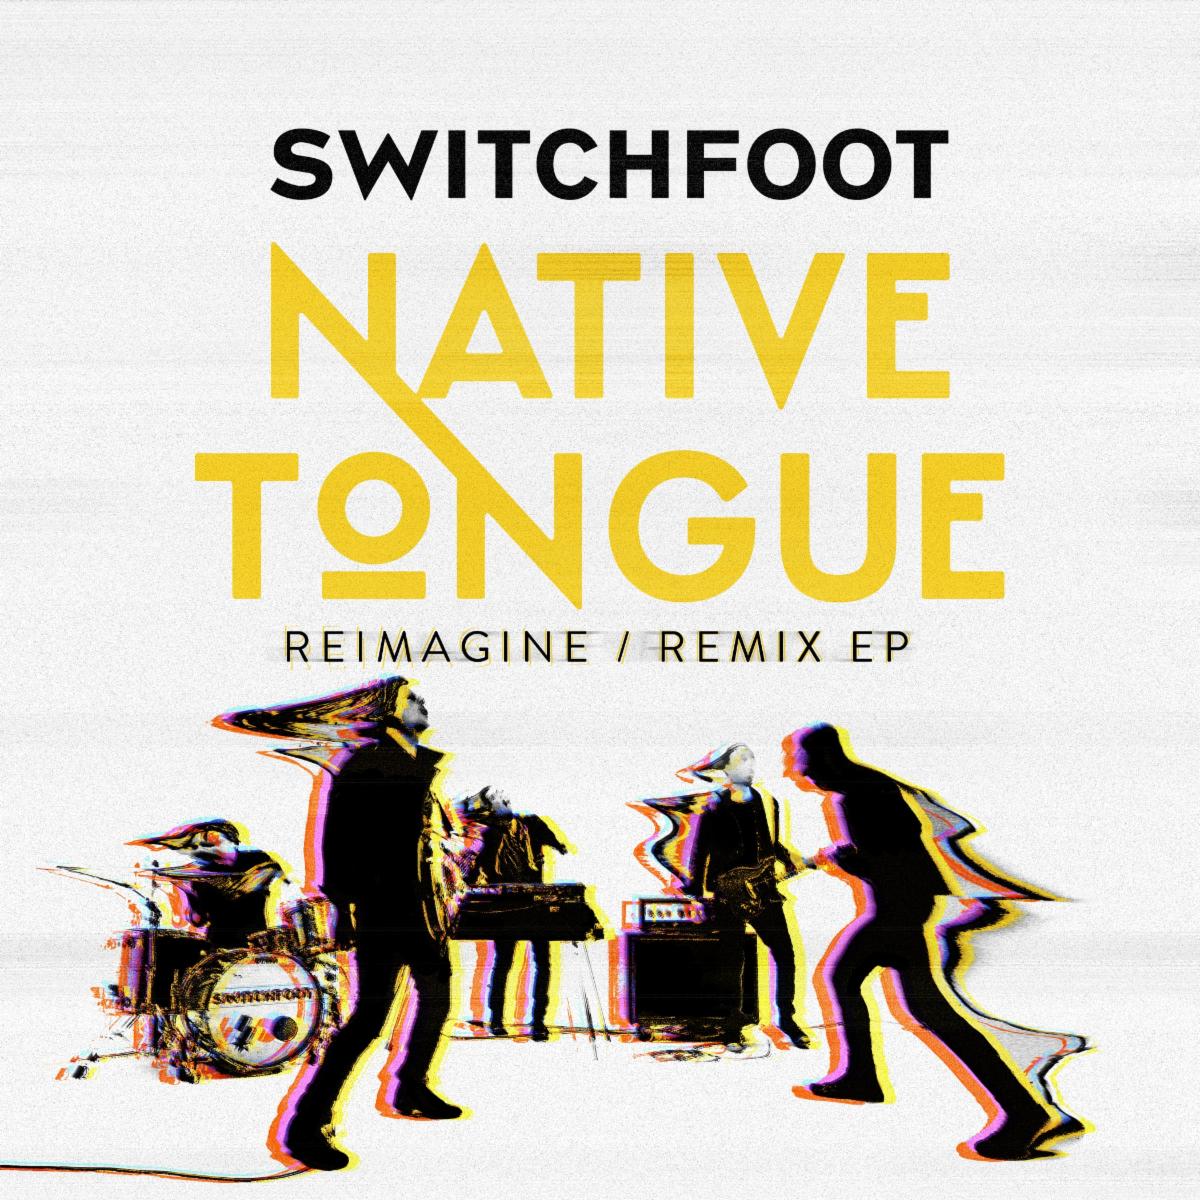 SWITCHFOOT Shares NATIVE TONGUE: REIMAGINE / REMIX EP Today